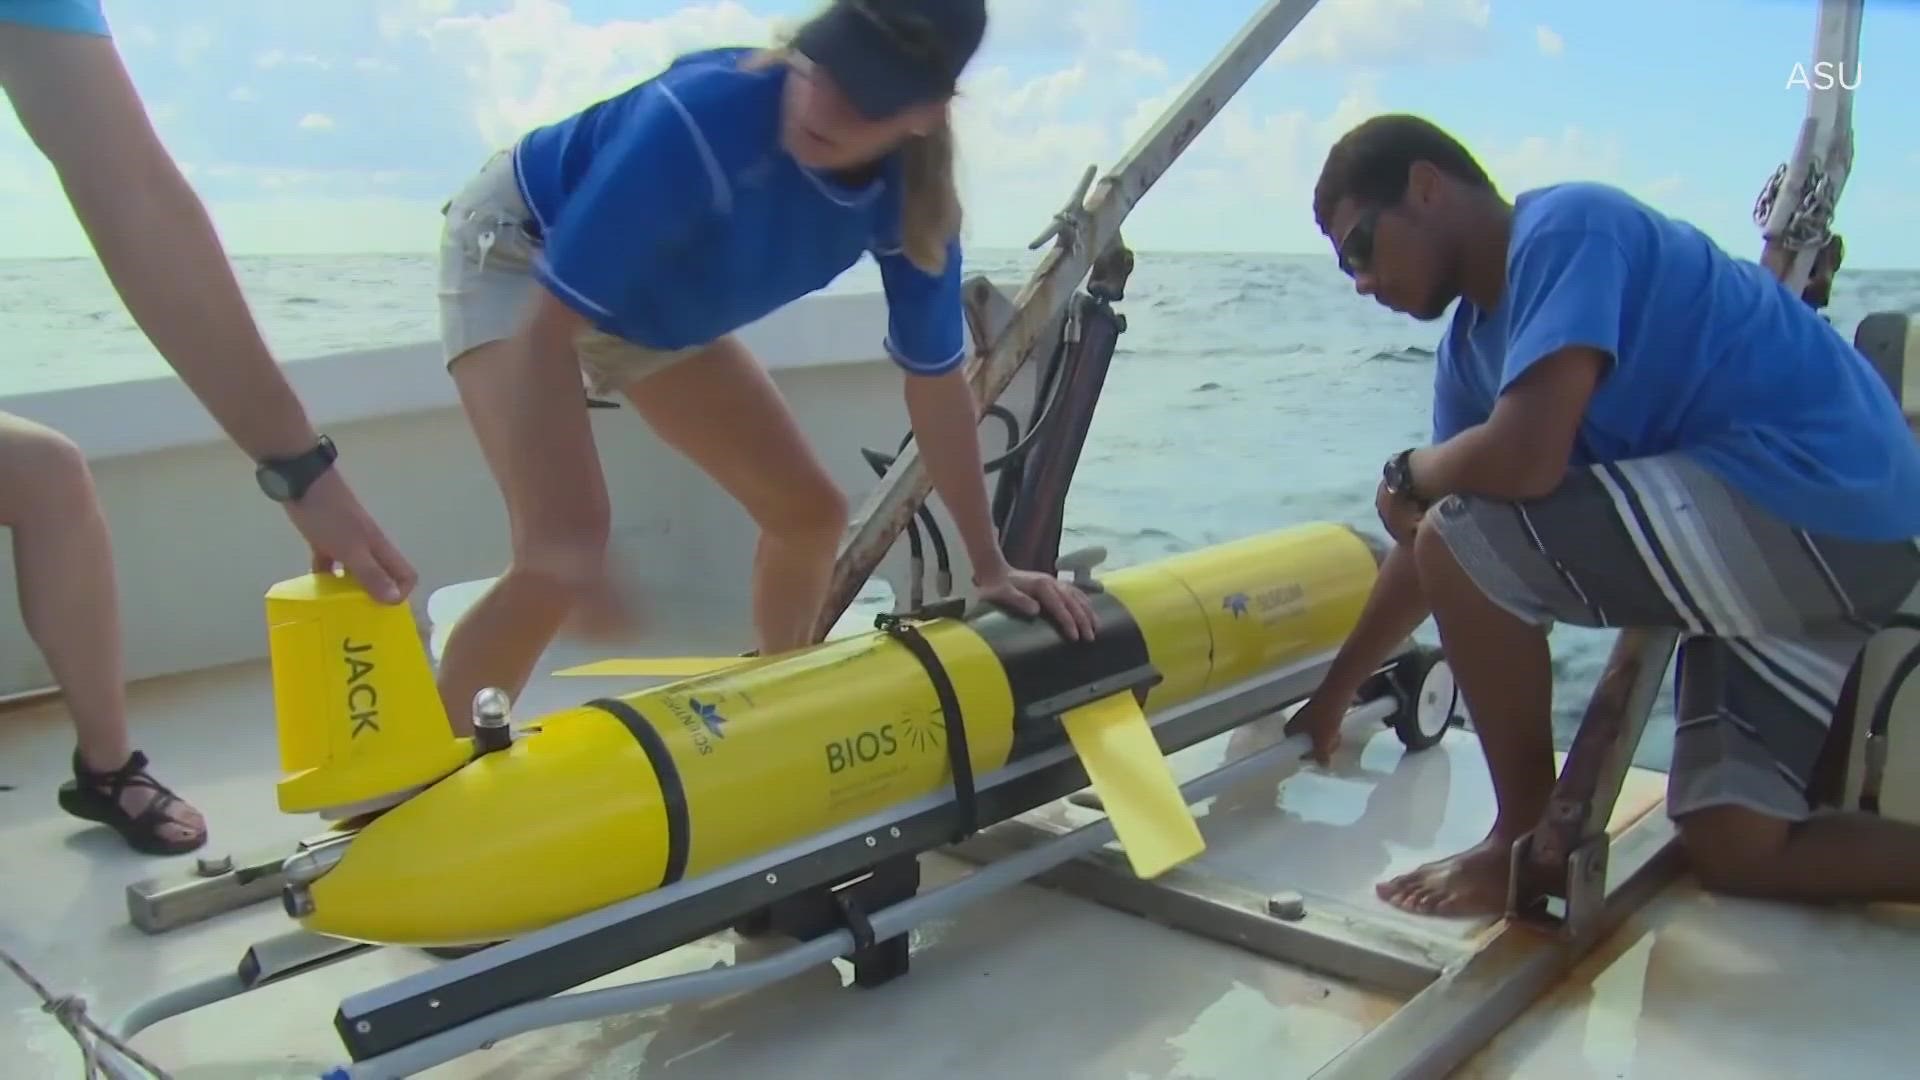 Arizona isn't the first place most people think of when considering the ocean, but a new school at ASU is pushing the limit of what's possible for students.